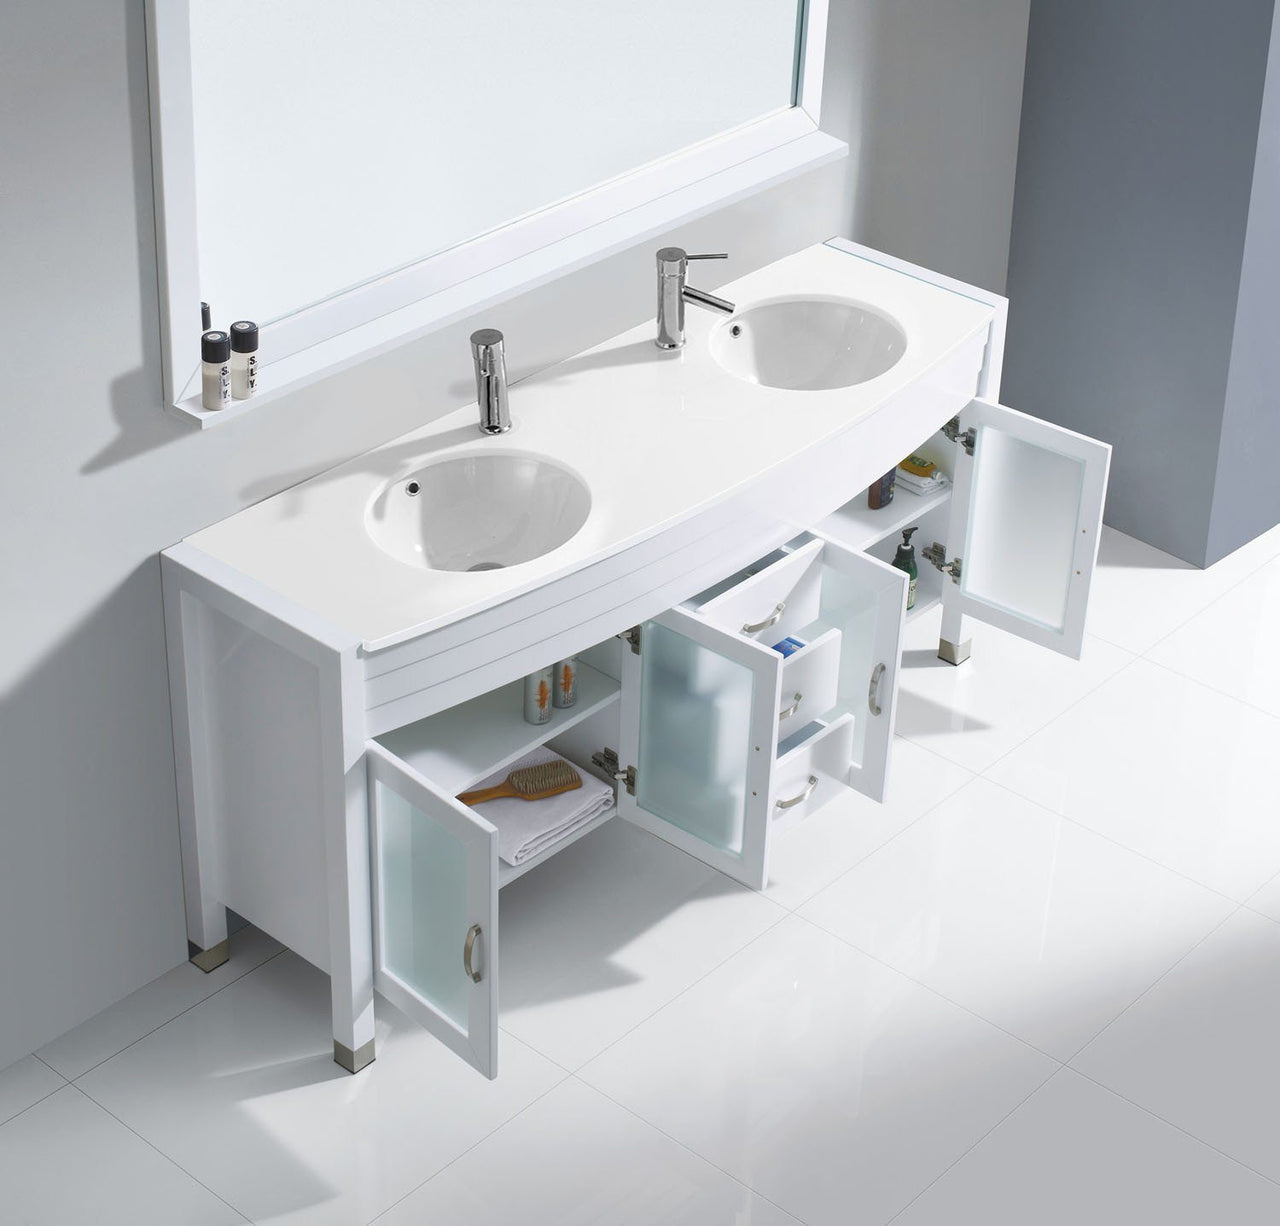 Virtu USA Ava 71" Double Round Sink White Top Vanity in White with Polished Chrome Faucet and Mirror Vanity Virtu USA 